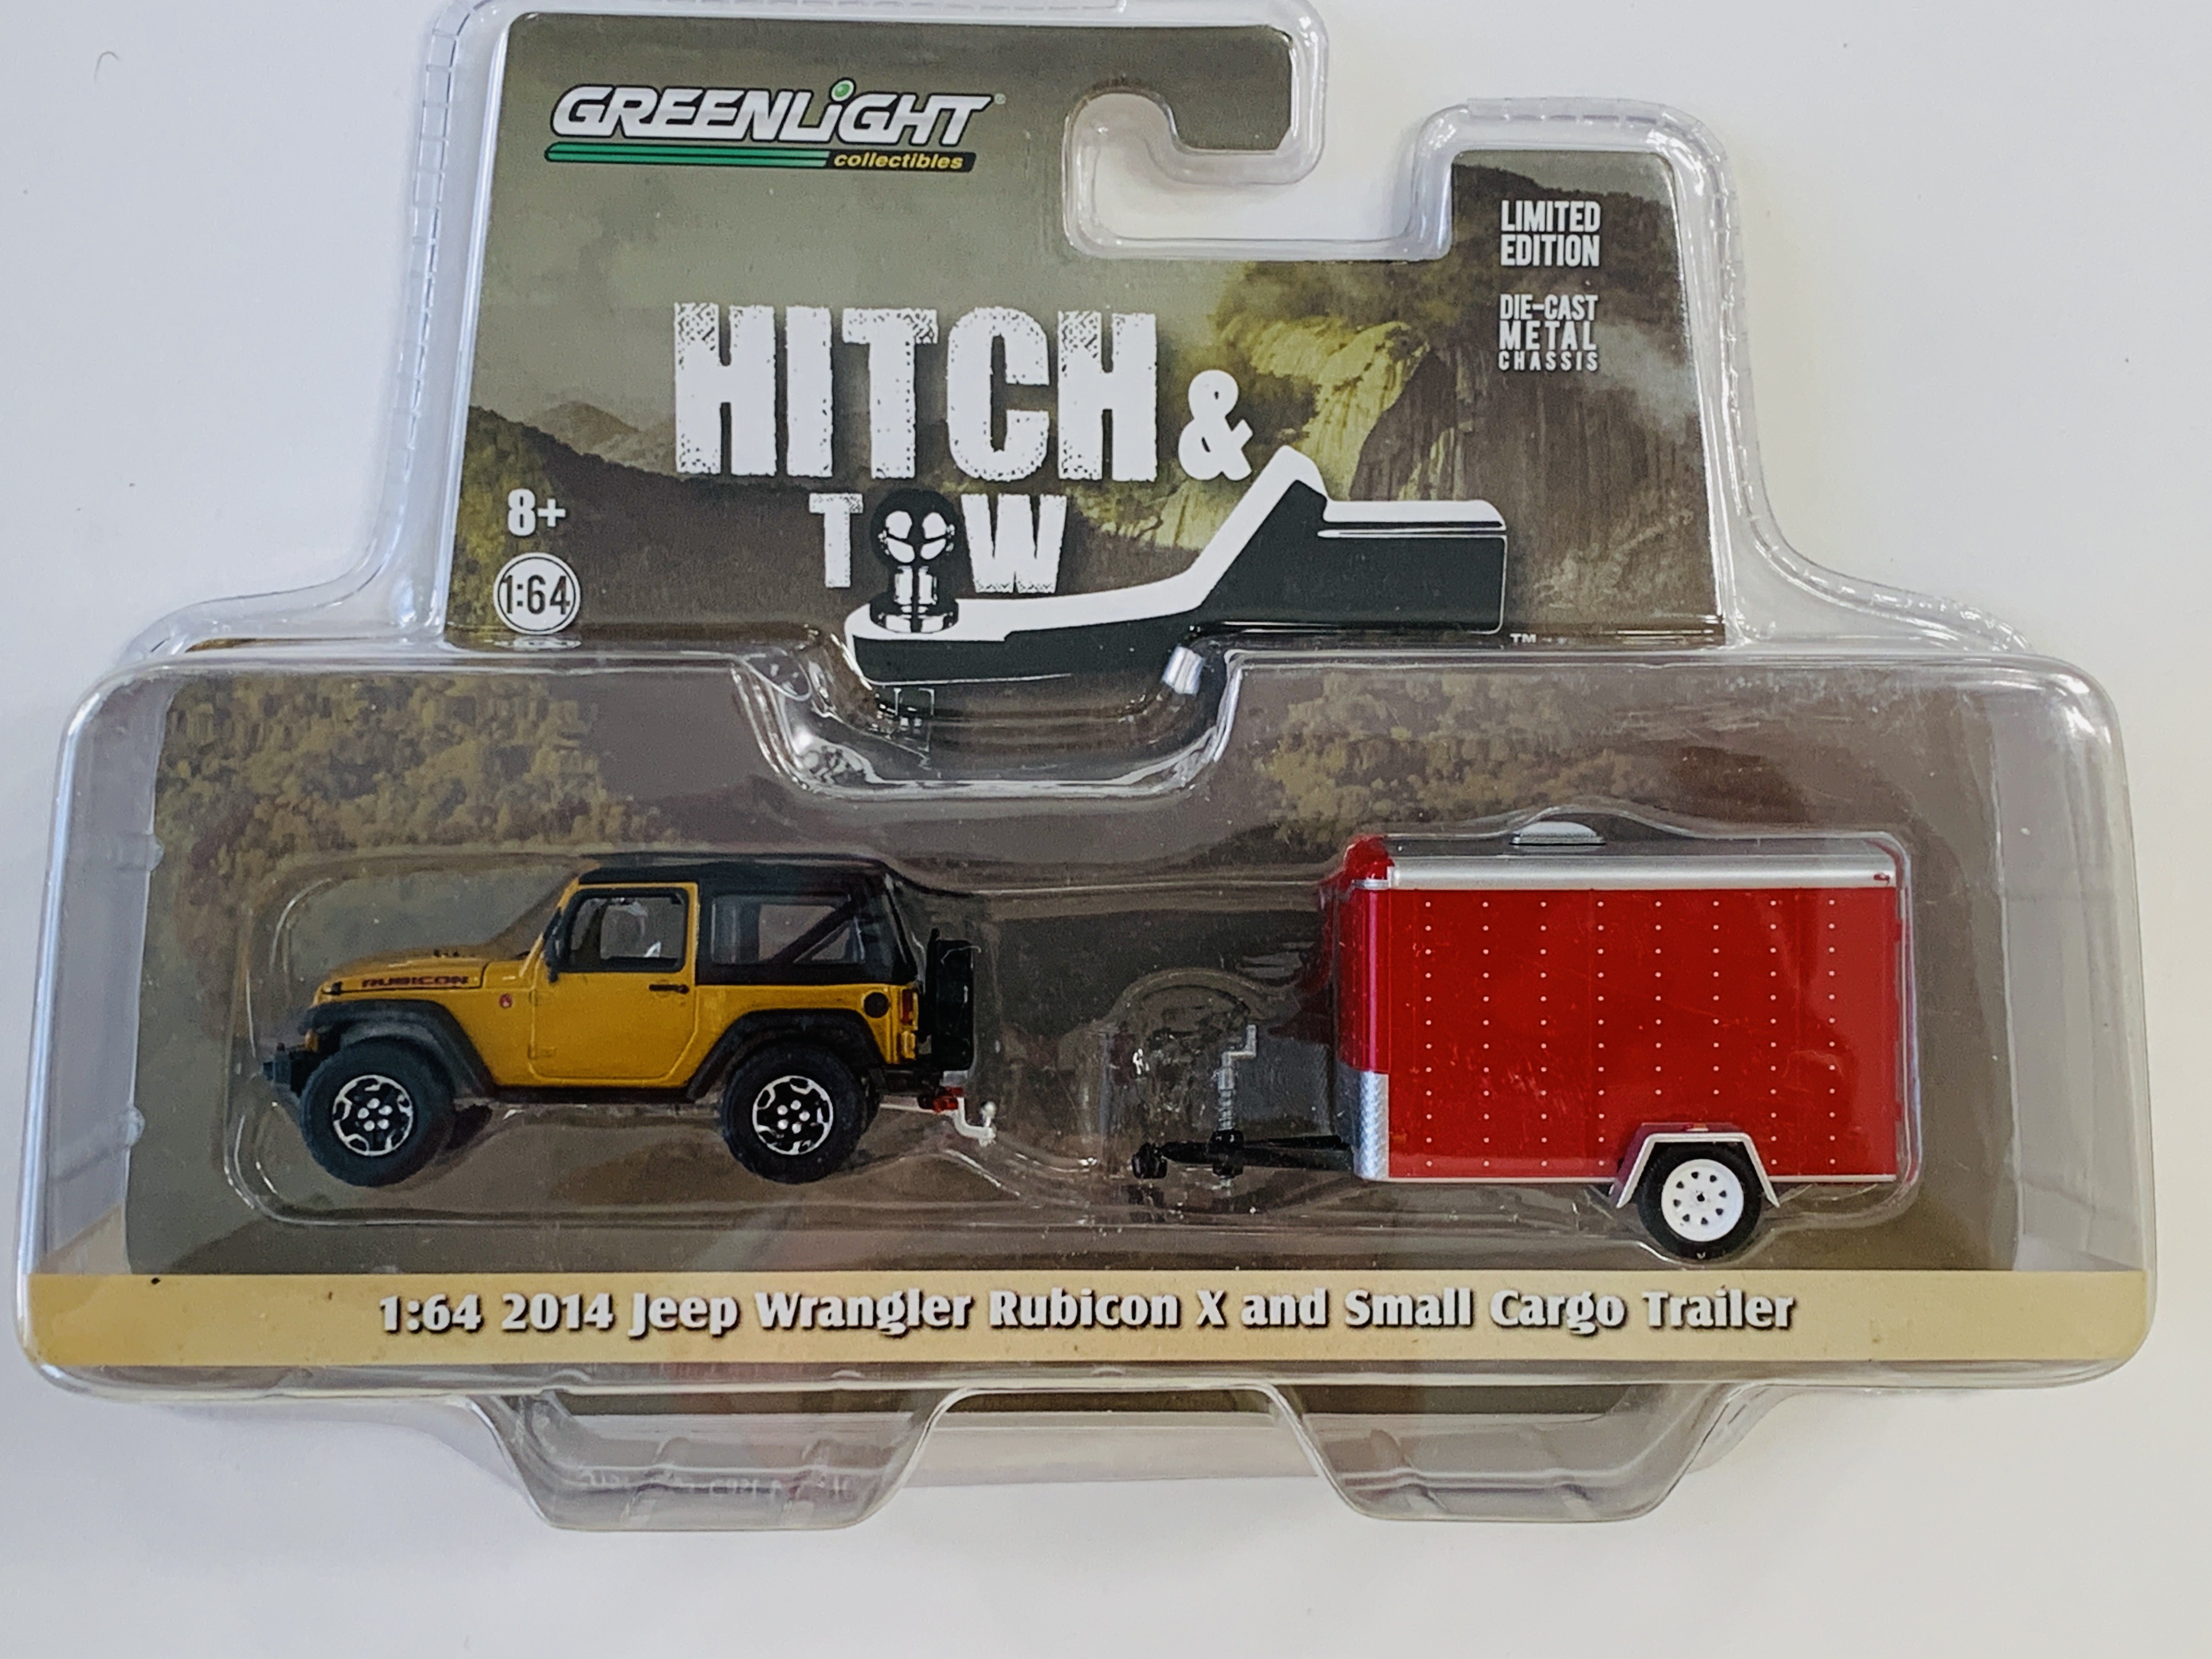 Greenlight Hitch & Tow 2014 Jeep Wrangler Rubicon X and Cargo Trailer